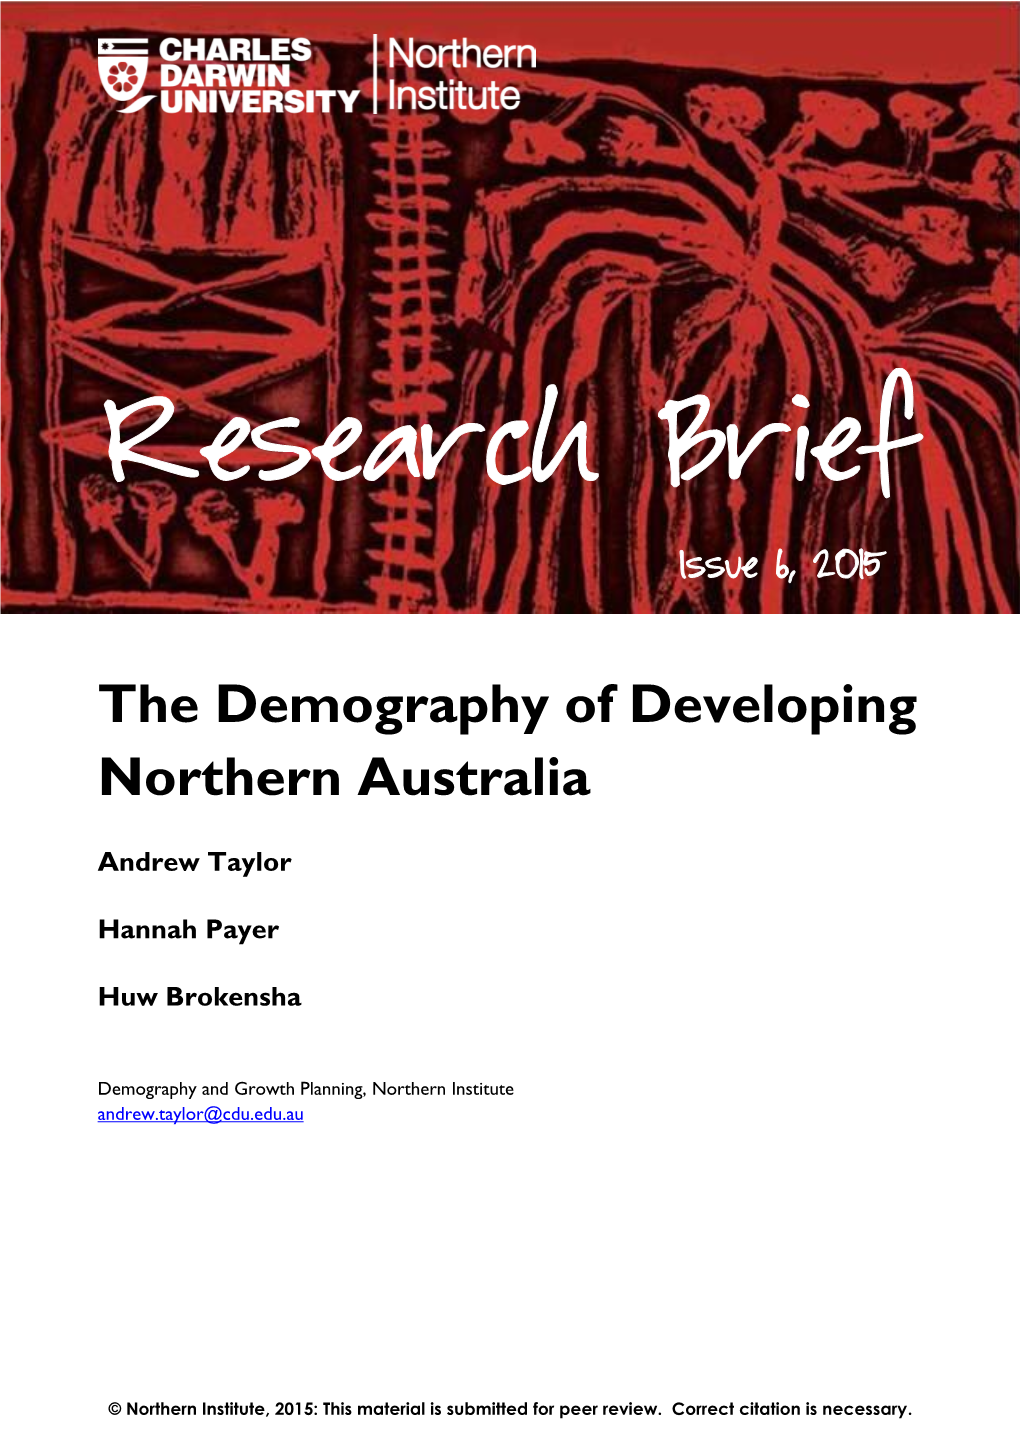 The Demography of Developing Northern Australia